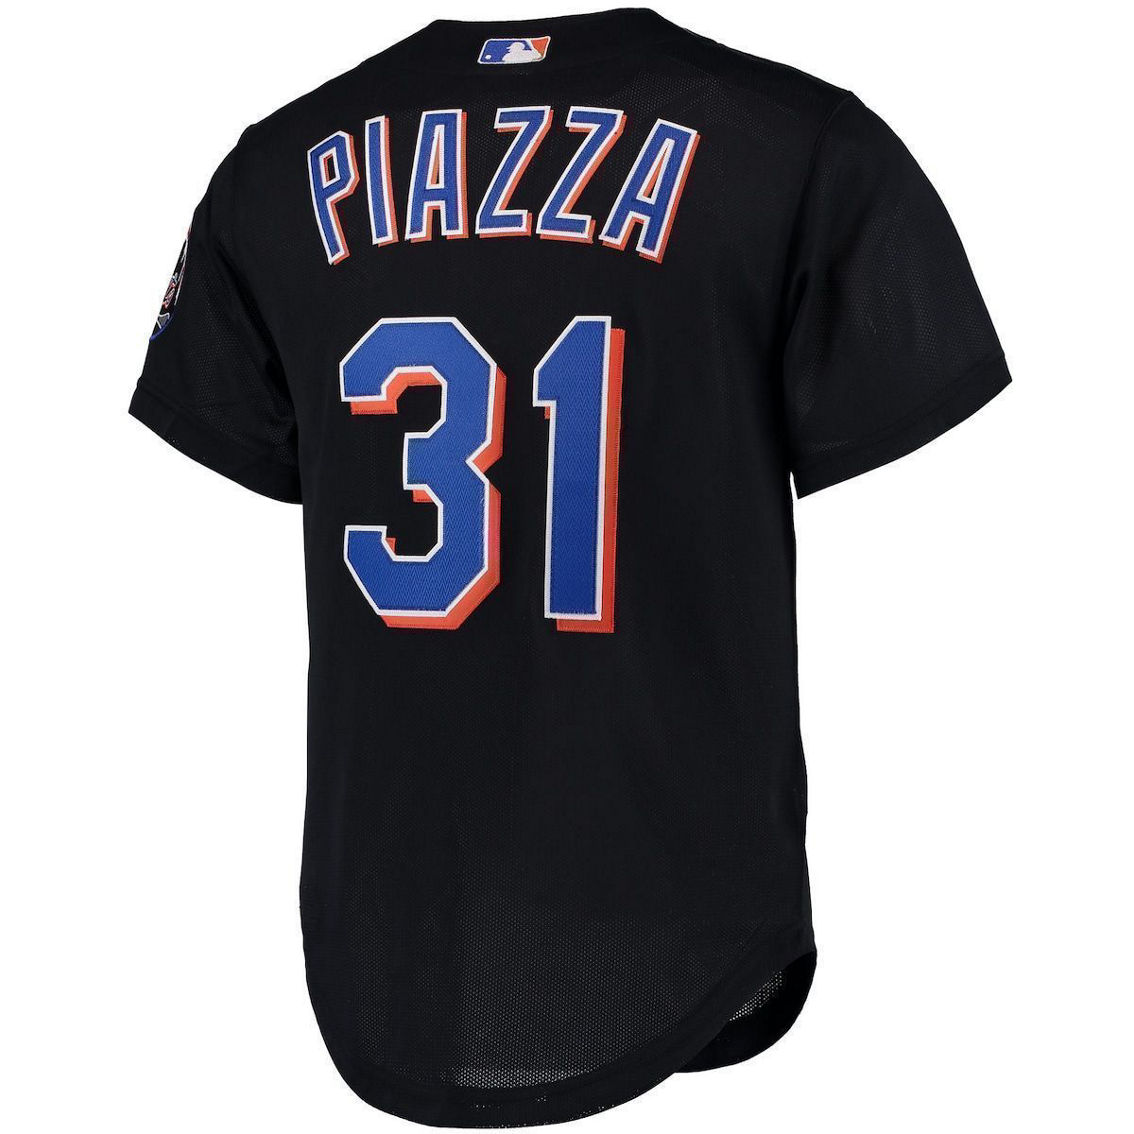 Mitchell & Ness Men's Mike Piazza Black New York Mets Cooperstown Collection Mesh Batting Practice Button-Up Jersey - Image 4 of 4